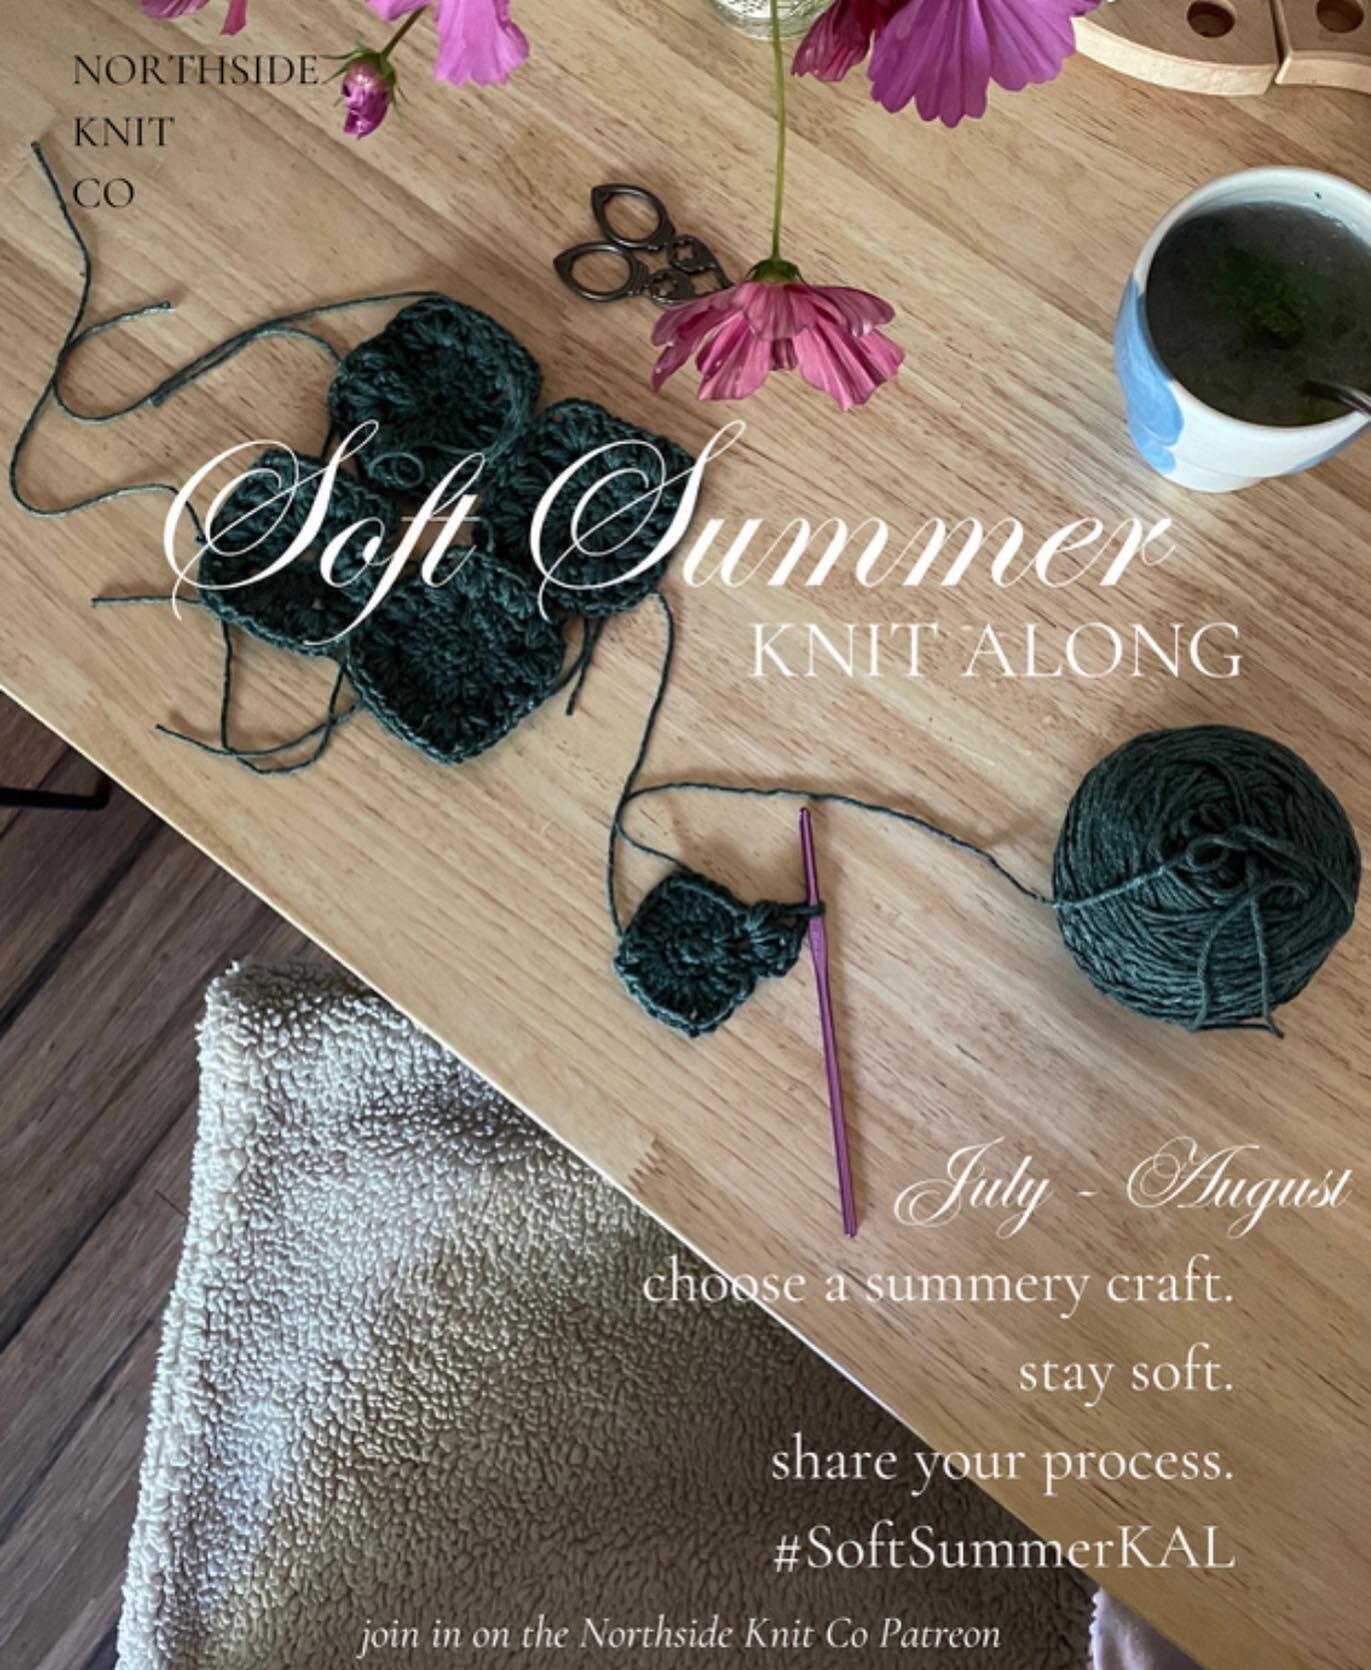 Soft Summer Knit Along just started over on the Northside Knit Co Patreon page 💞 follow the link in bio!
.
Join the Northside Knit Club, shimmy down into your stash, and cast on a summery knit with us. Event activities and posts will be up on Patreo